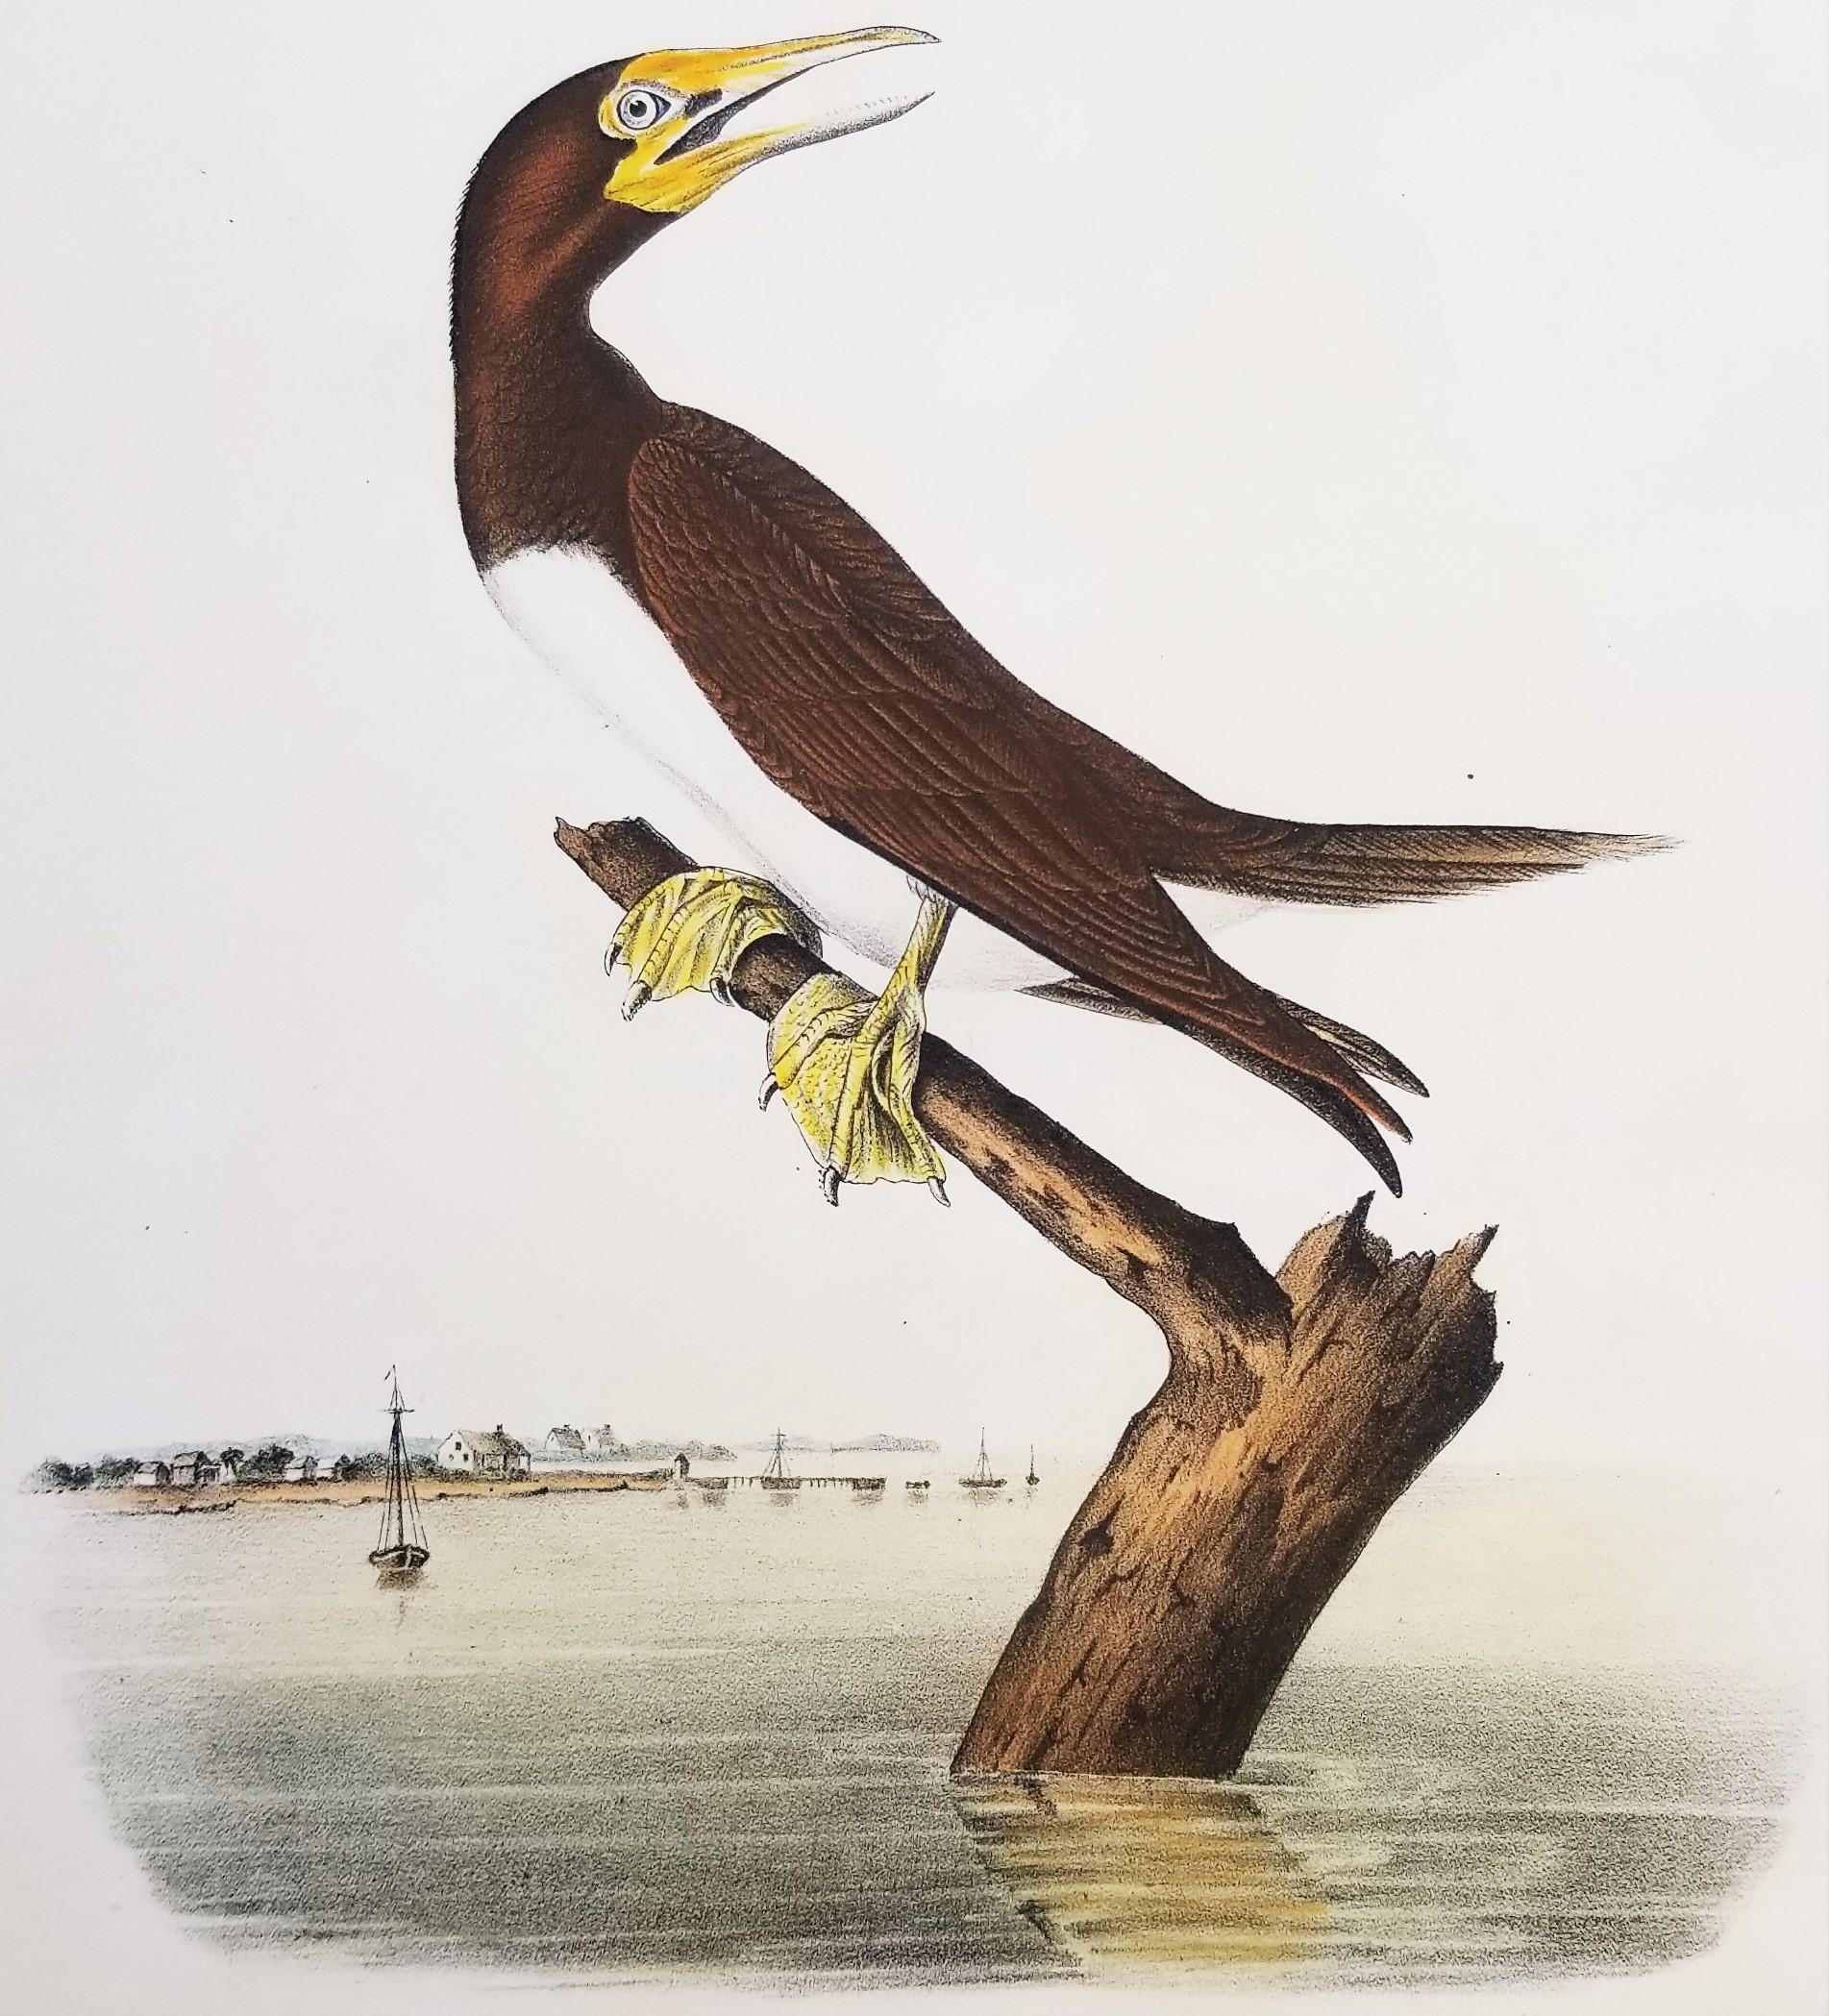 Artist: John James Audubon (American, 1785-1851)
Title: "Booby Gannet" (Plate 426, No. 86)
Portfolio: The Birds of America, First Royal Octavo Edition
Year: 1840-1844
Medium: Original Hand-Colored Lithograph on wove paper
Limited edition: approx.